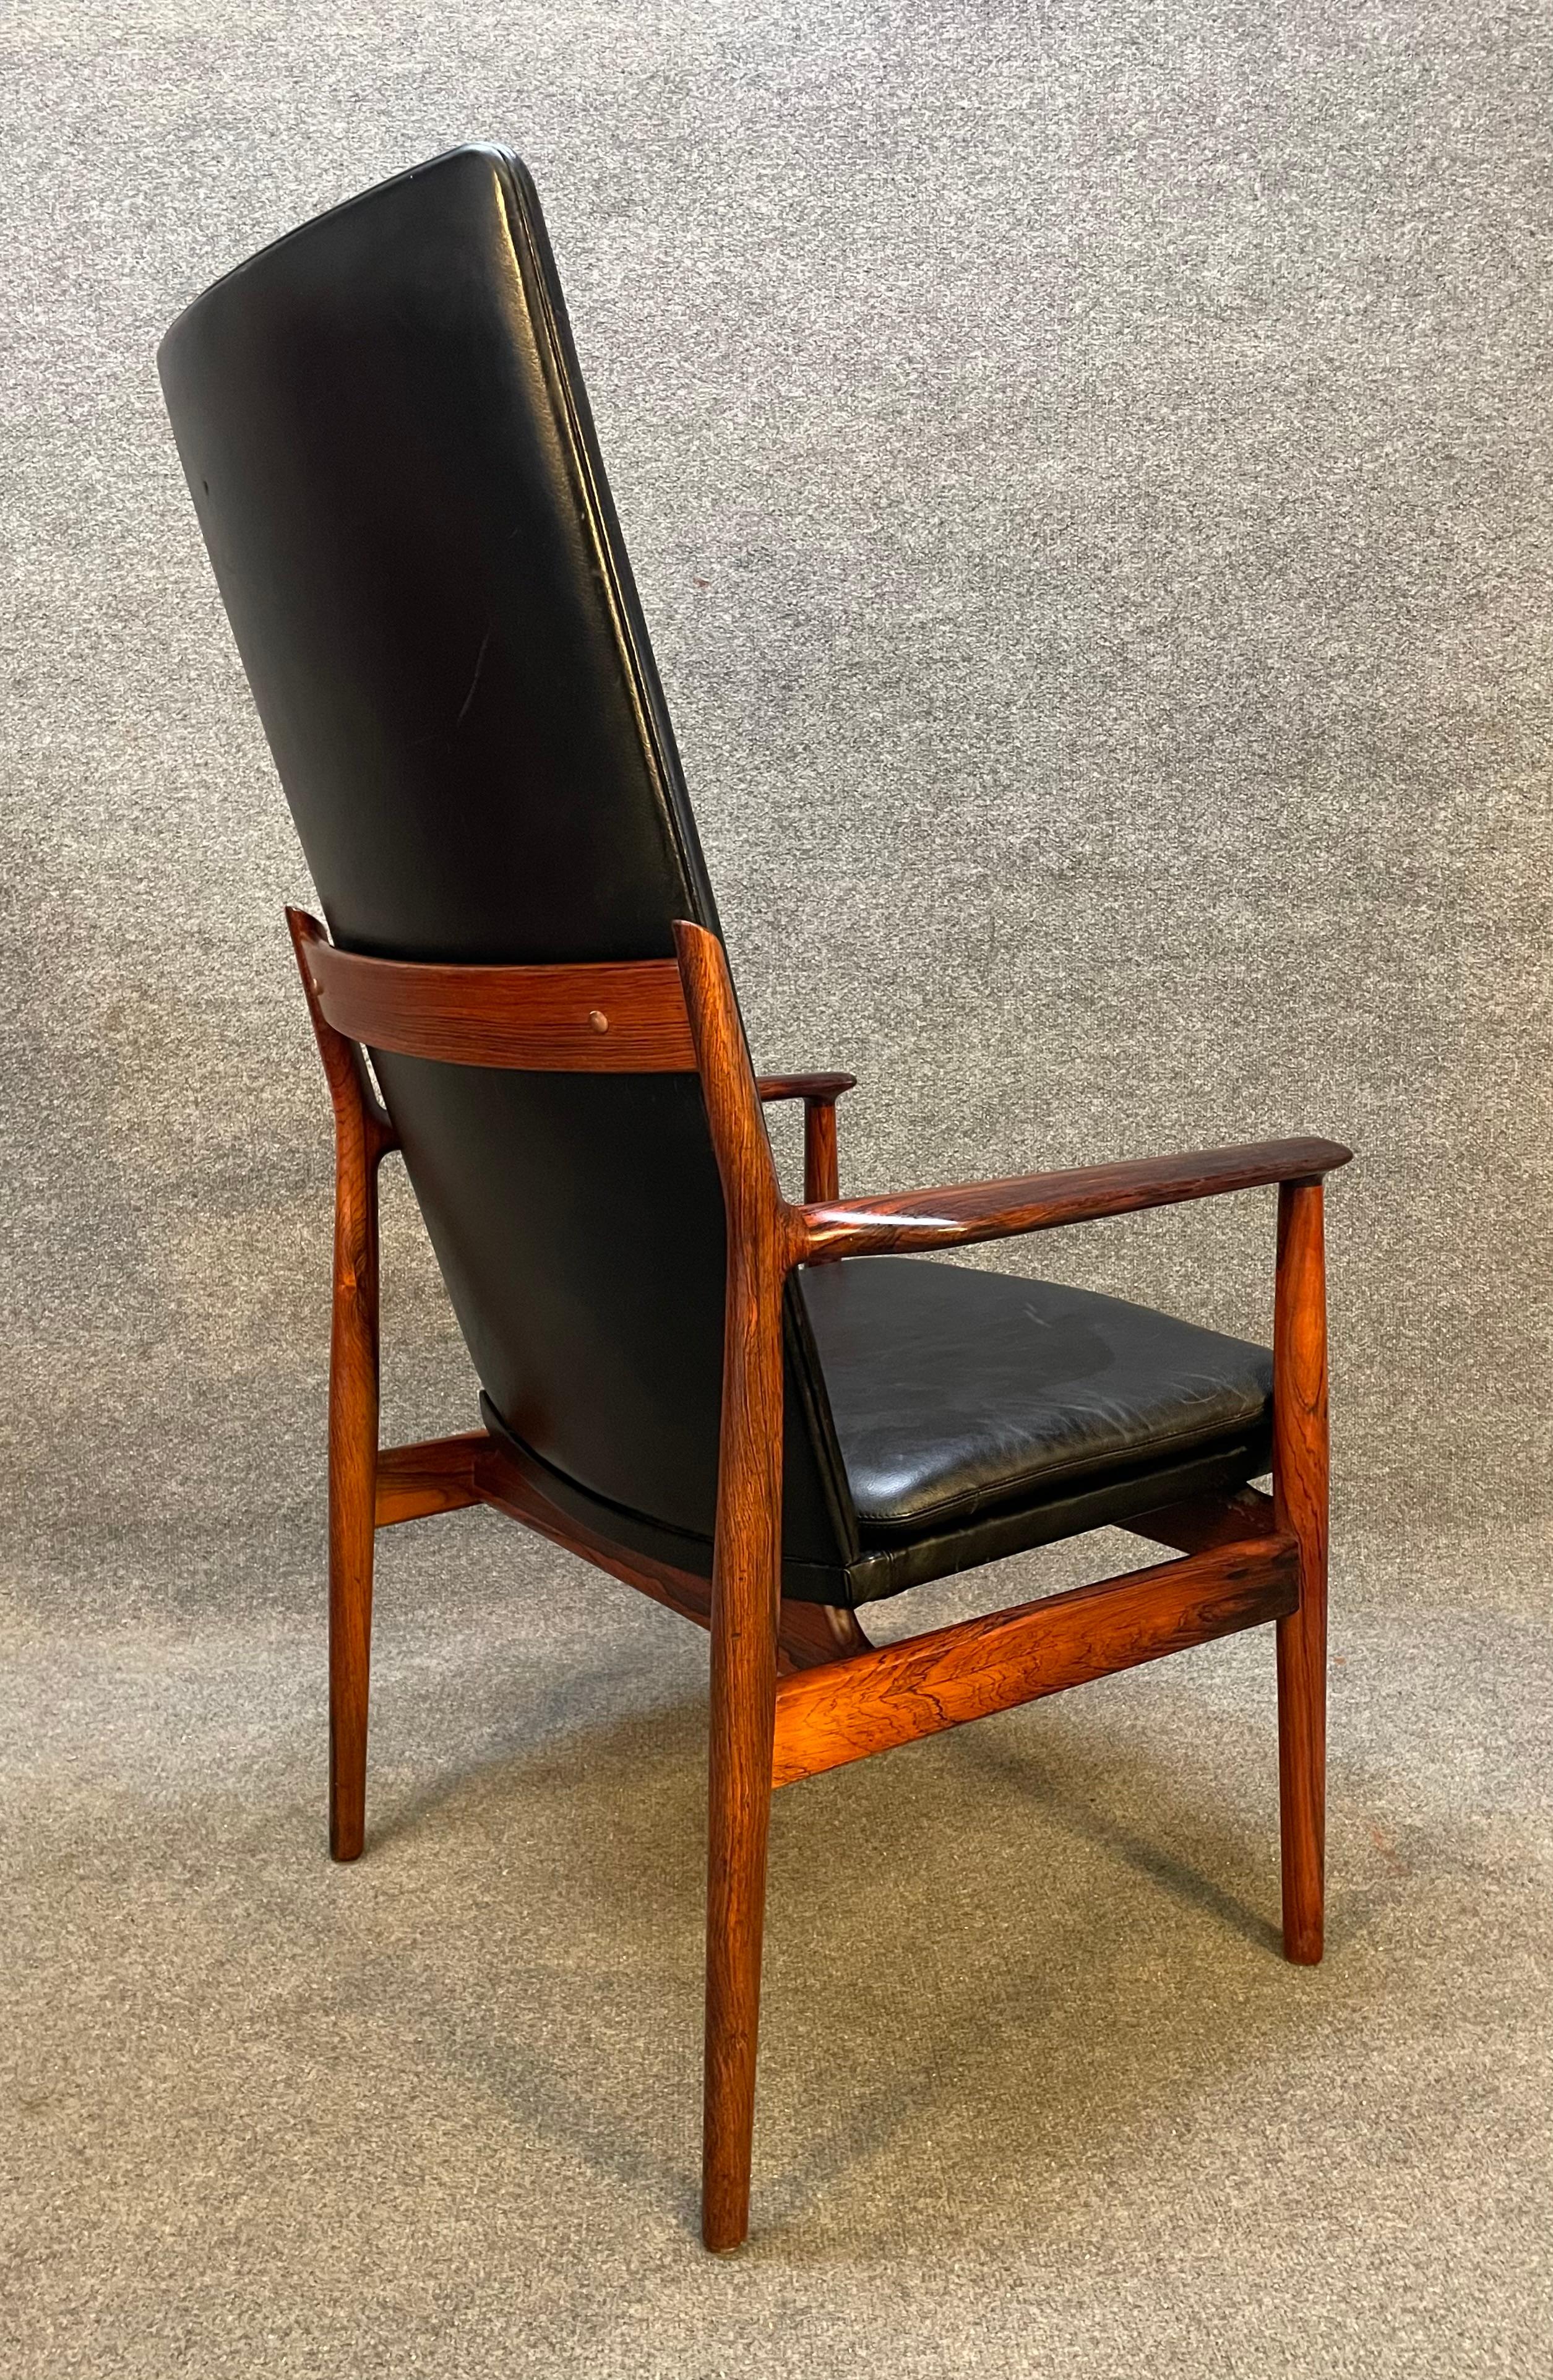 Mid-20th Century Vintage Danish Mid Century Rosewood Executive Chair by Arne Vodder for Sibast